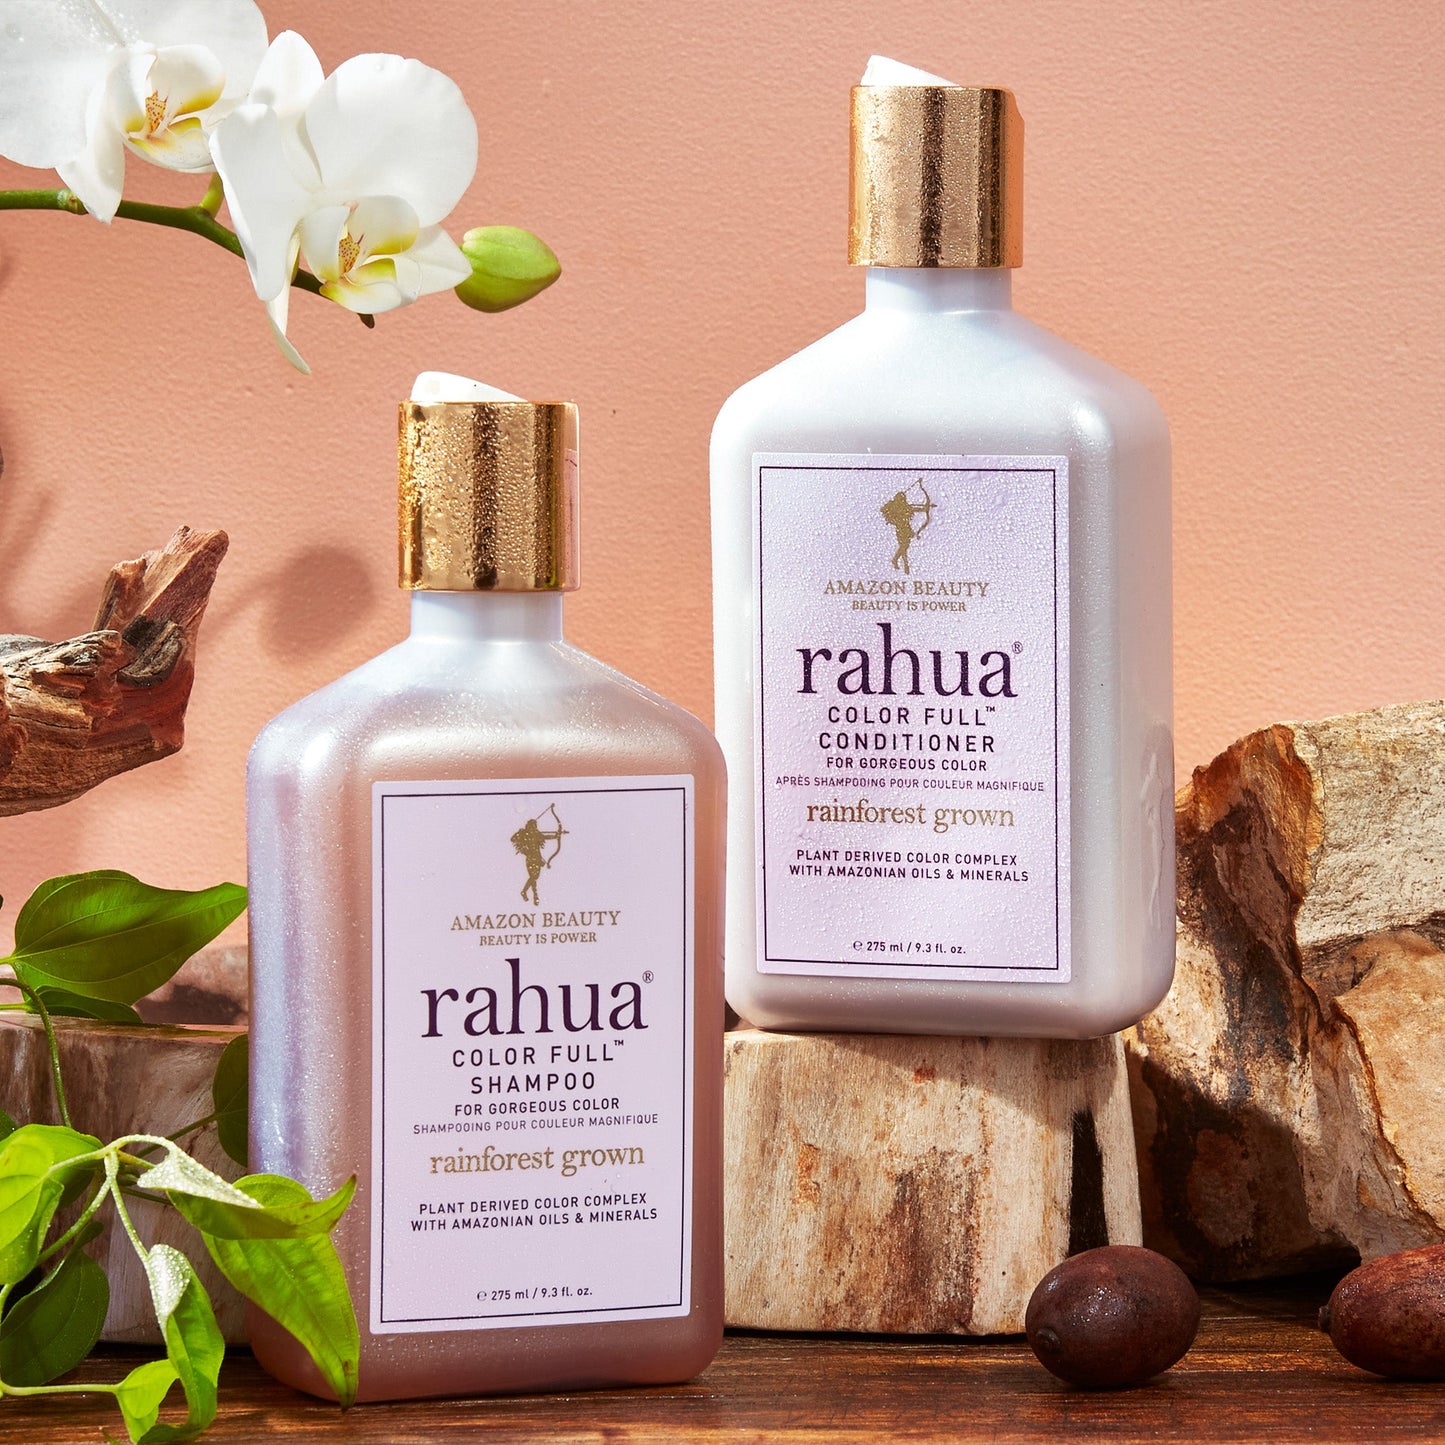 Rahua Color full Shampoo and Color full conditioner bottle with natural ingredient rahua seeds , gardenia flower and green leaves